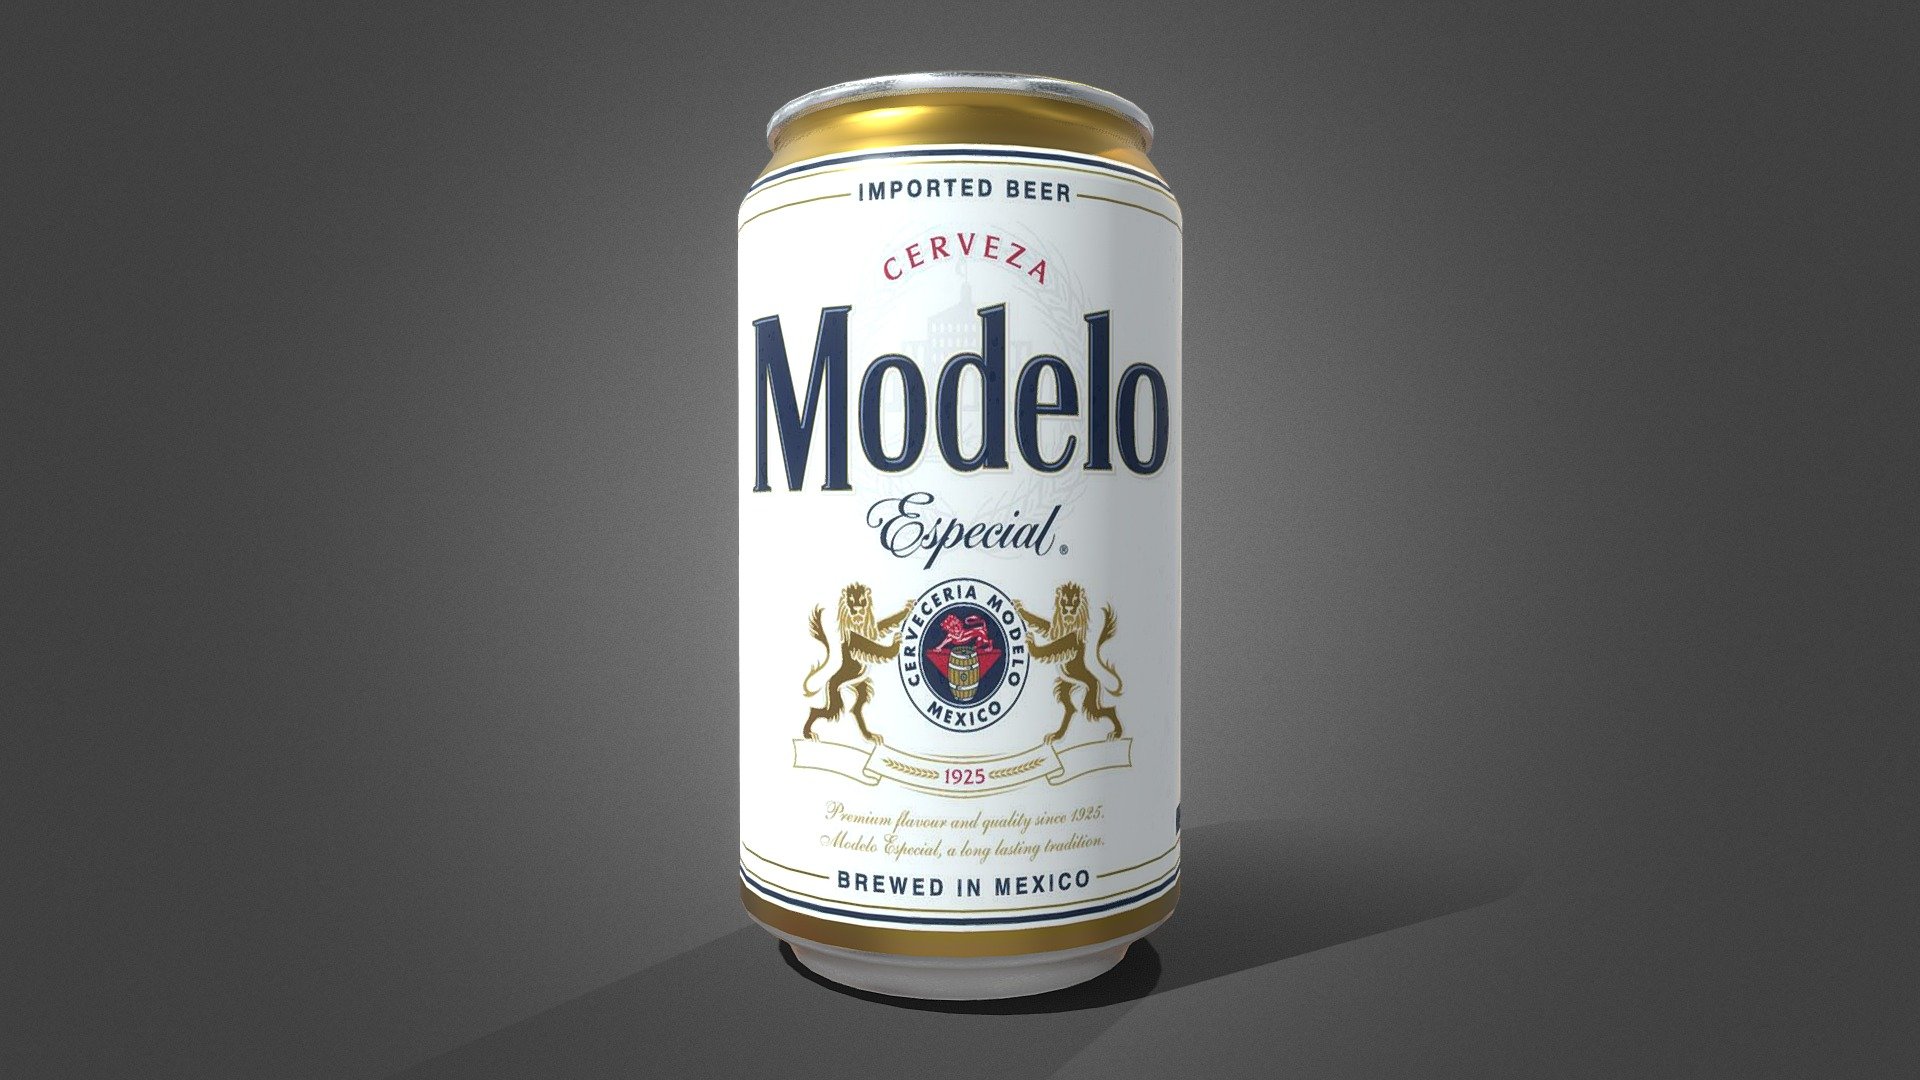 FBX, OBJ, BLEND, TEXTURES
The 3D model reproduces the of a Modelo beer can. It features a metallic finish with the distinctive Modelo branding 3d model